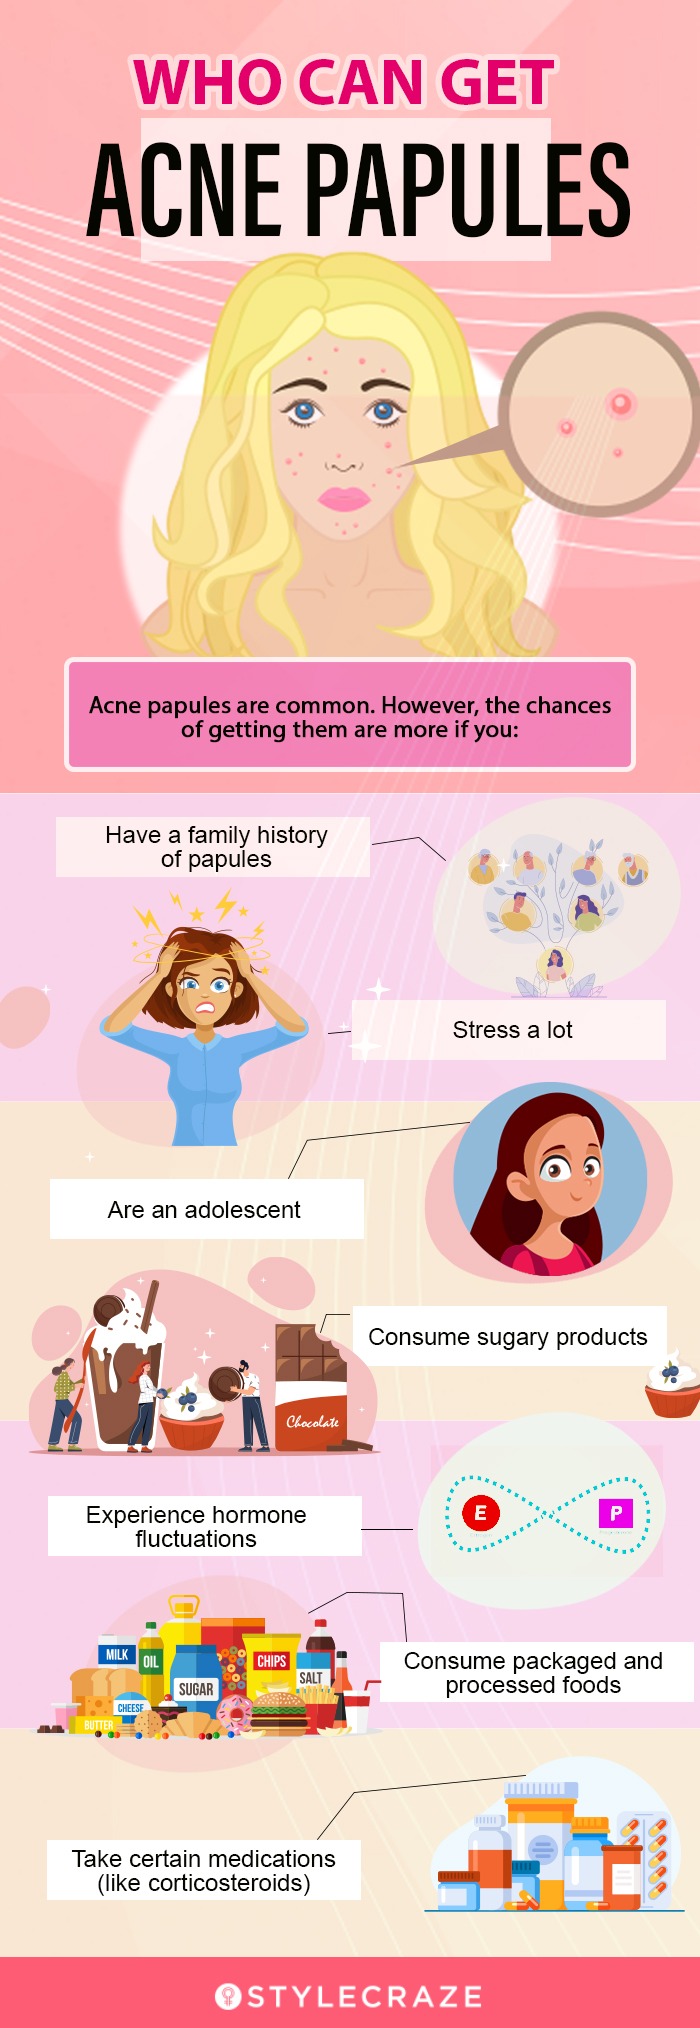 who can get acne papules [infographic]